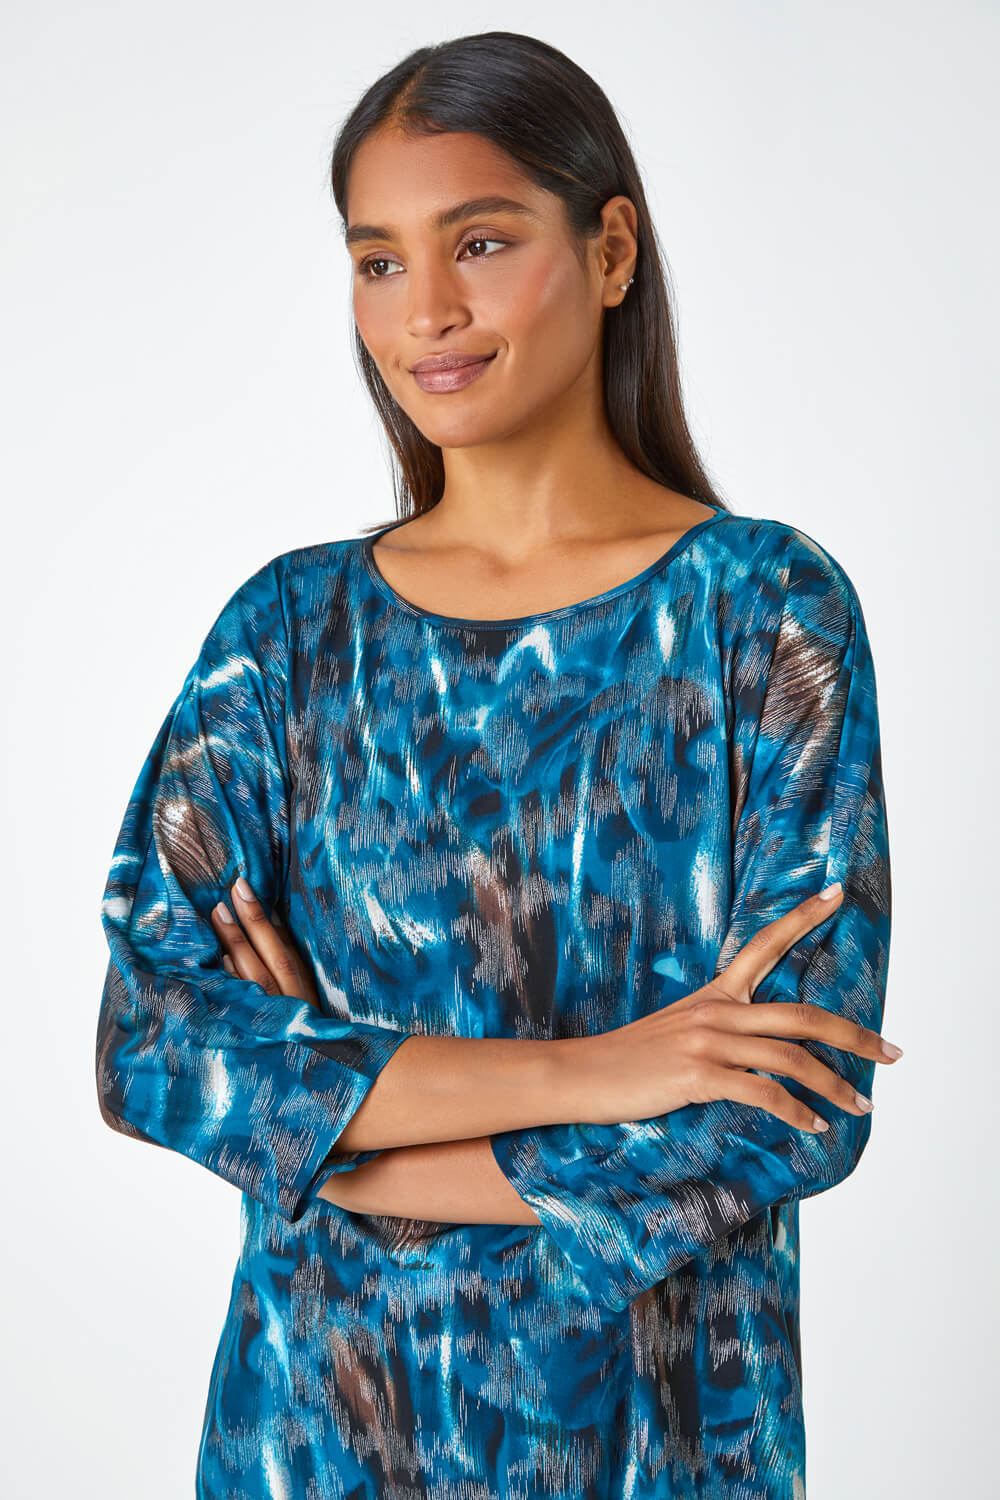 Blue Metallic Abstract Print Oversized T-Shirt, Image 4 of 5